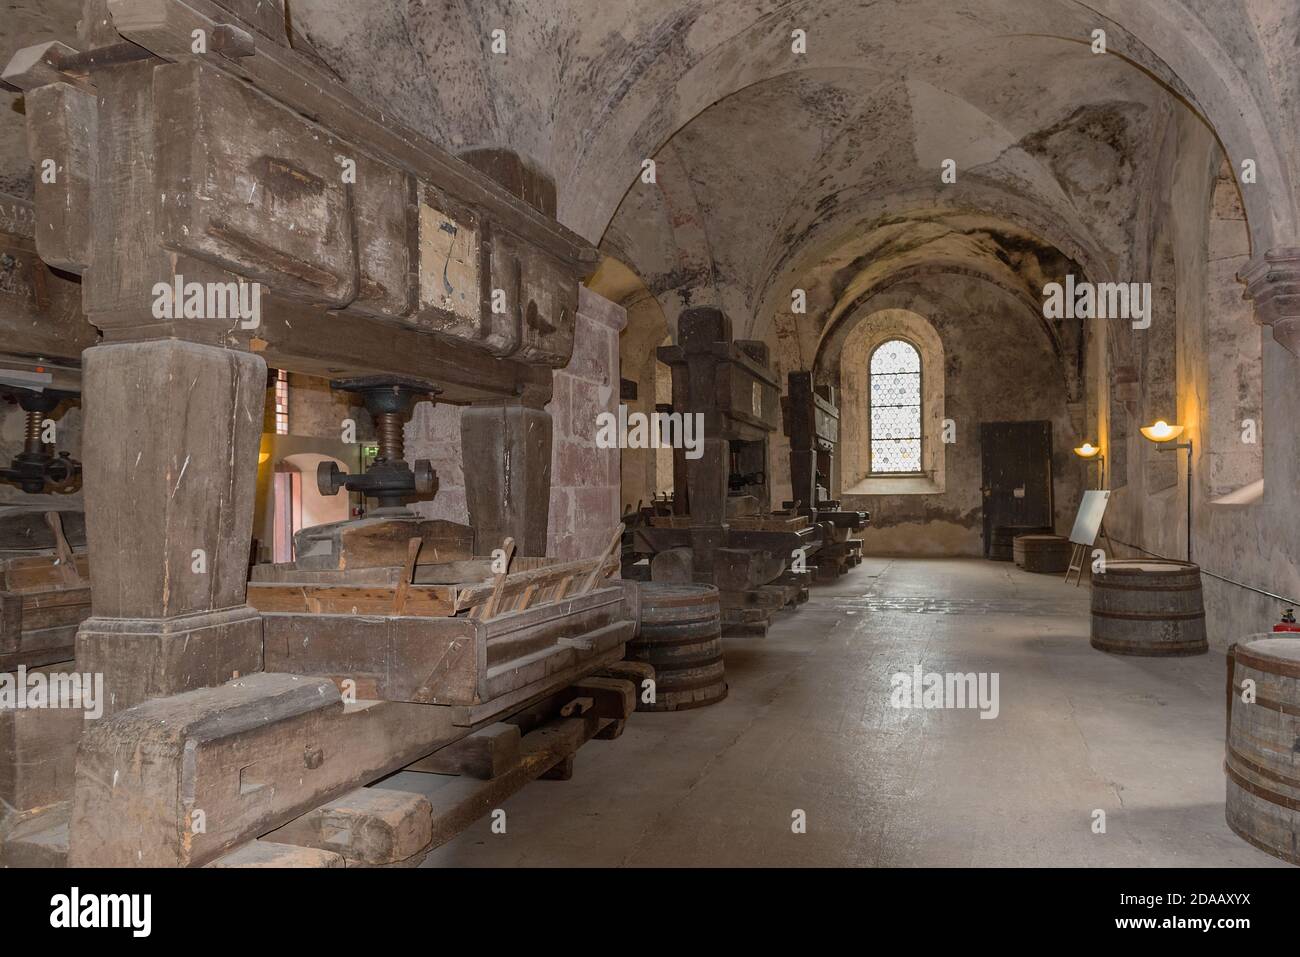 historical wine presses in the lay refectory of the Eberbach monastery, Hessen, Germany Stock Photo